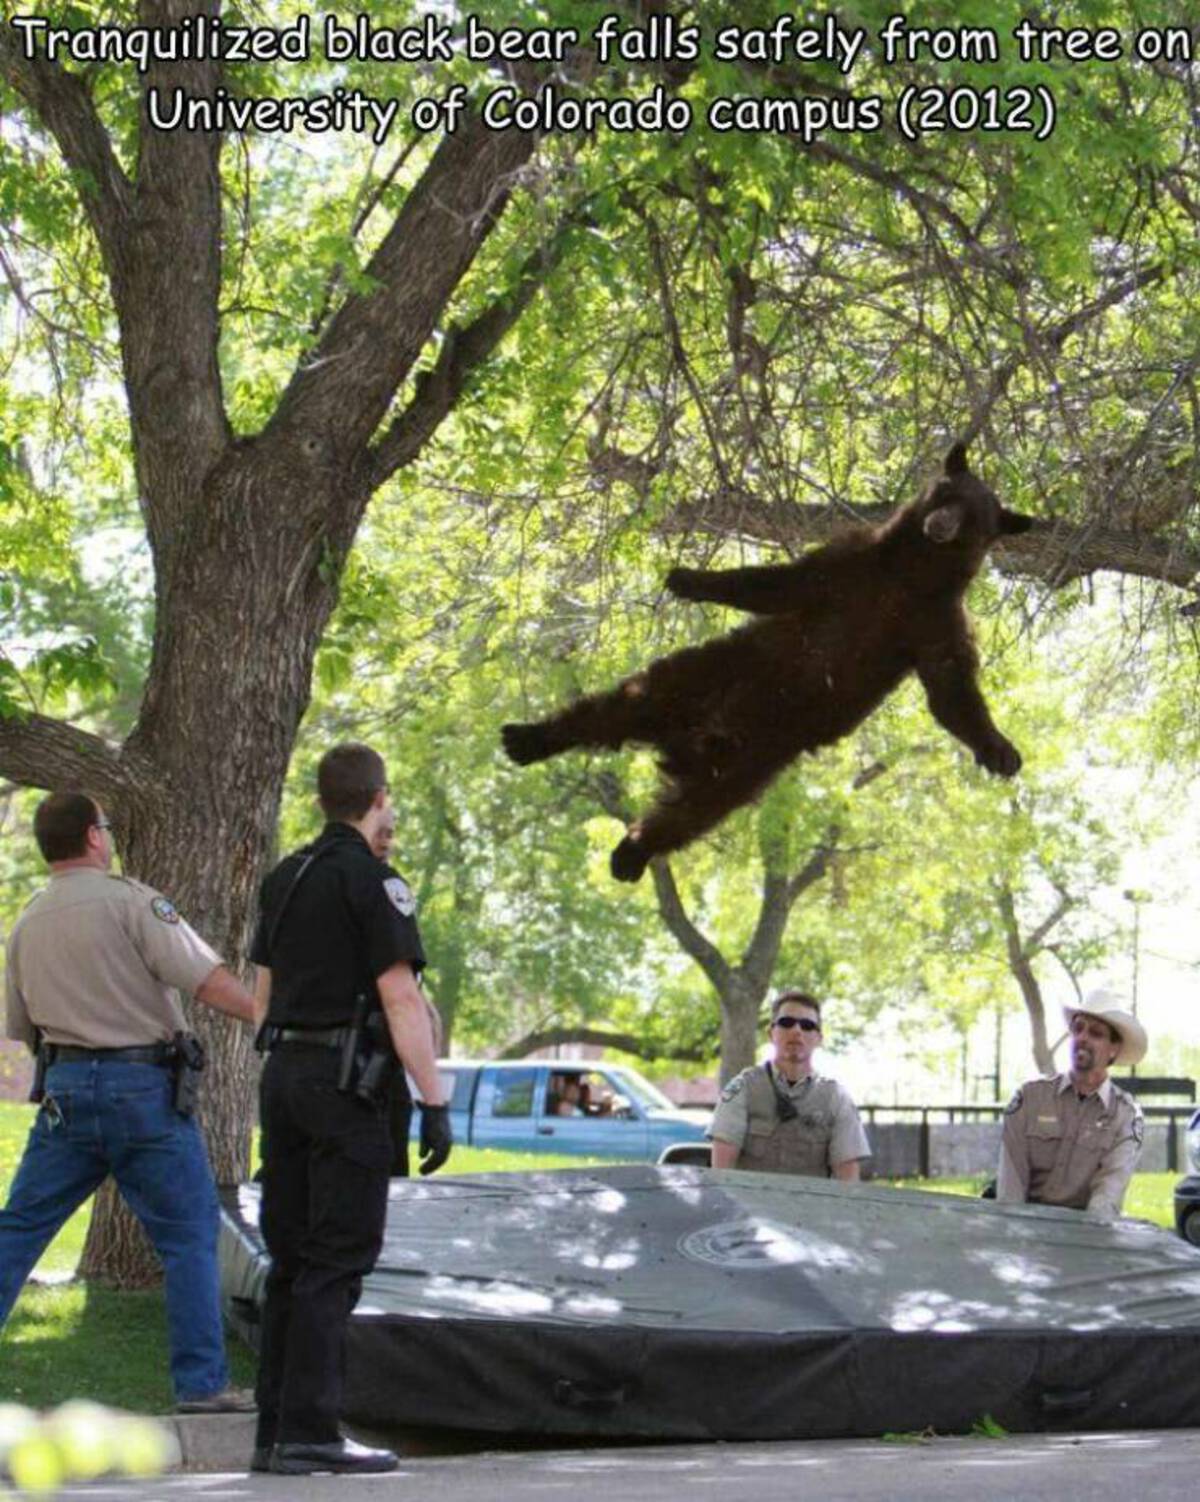 bear on trampoline meme - Tranquilized black bear falls safely from tree on University of Colorado campus 2012